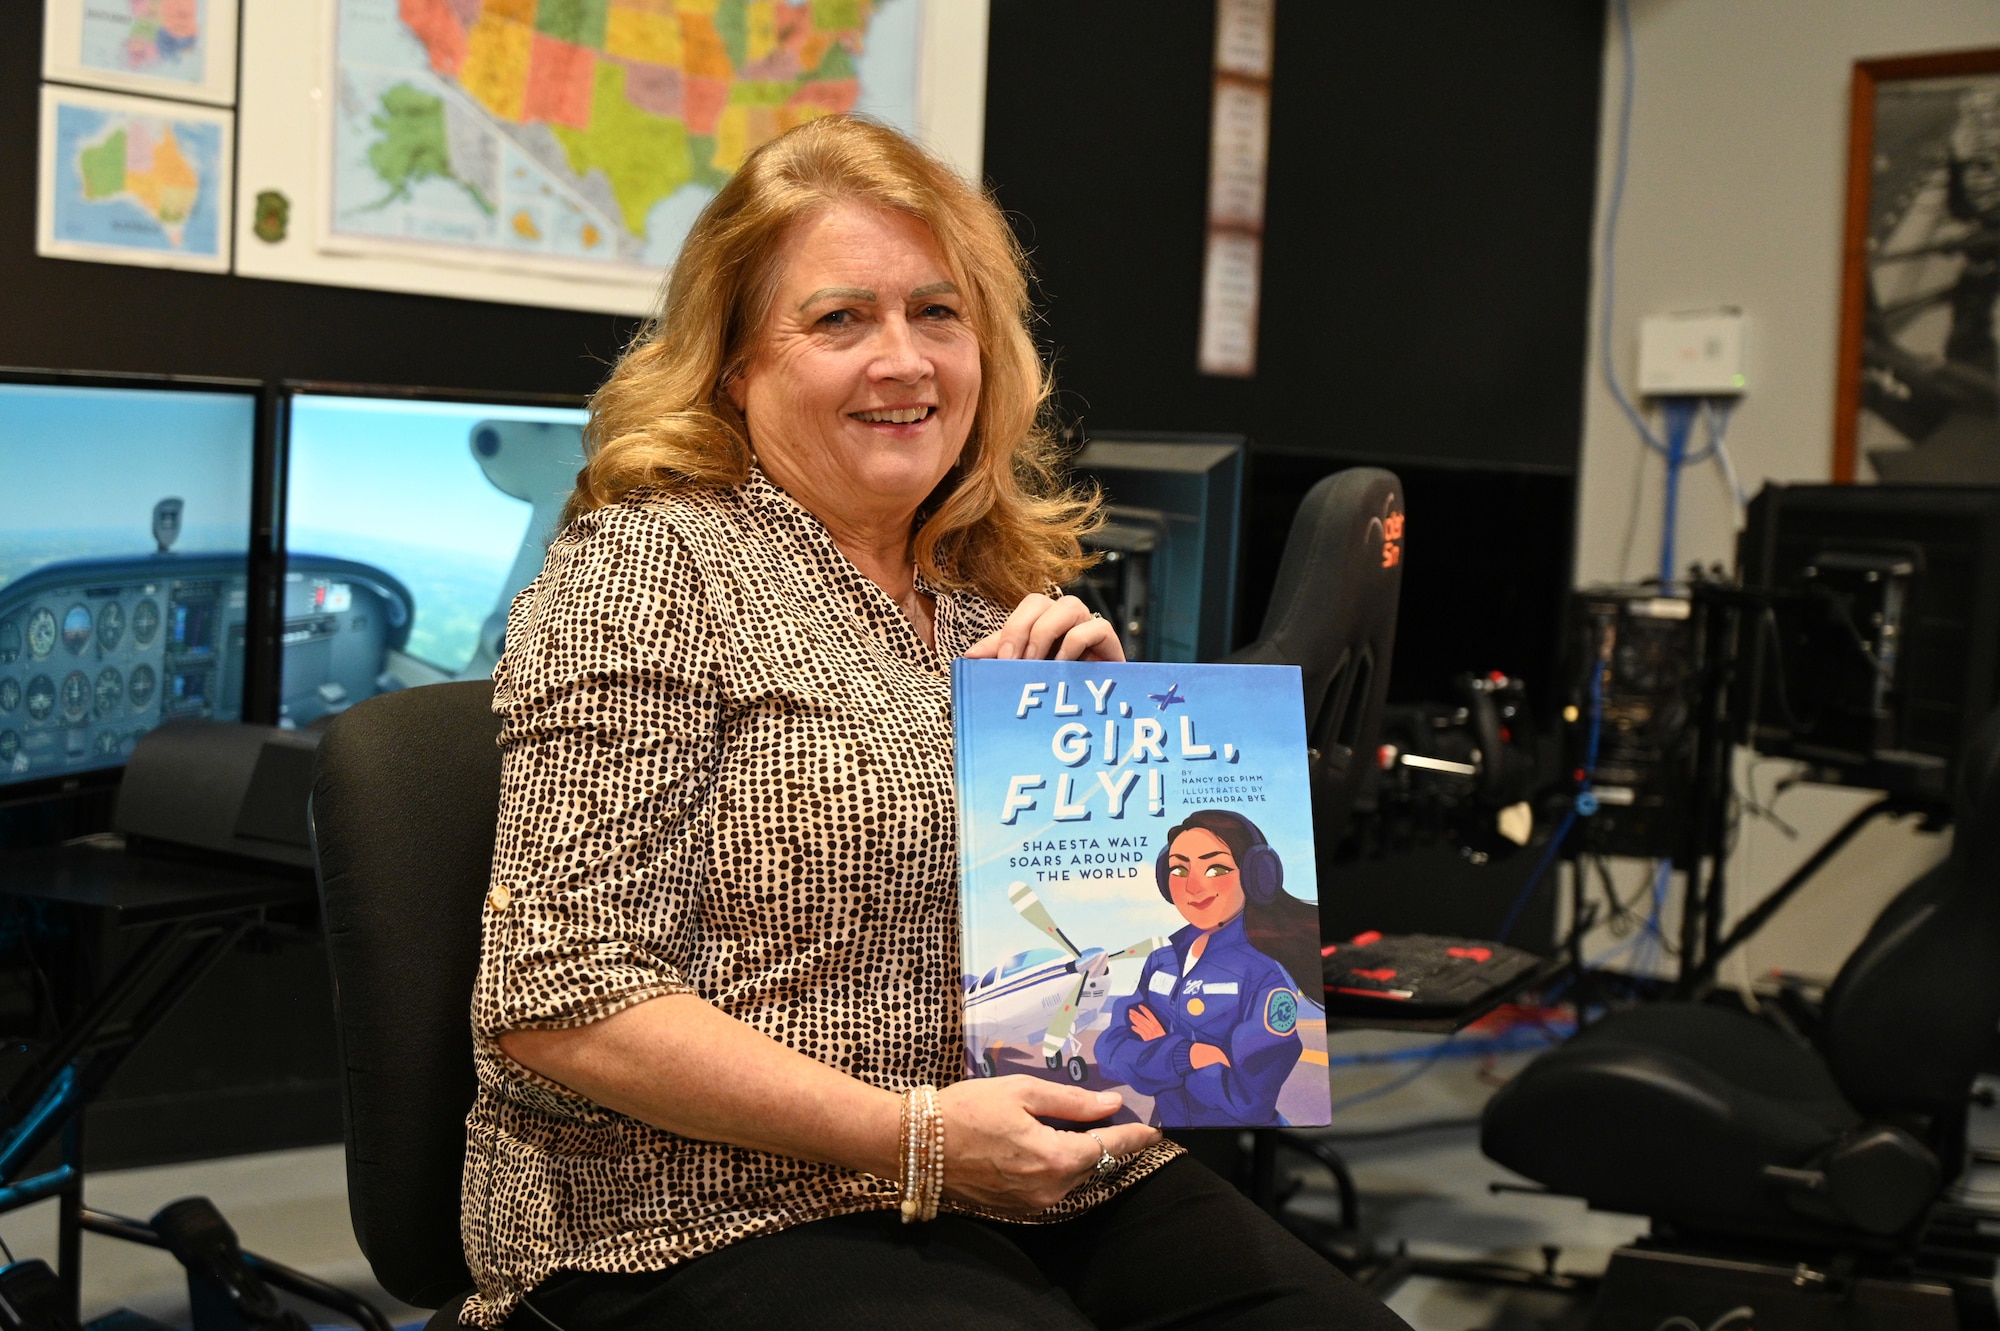 Author Nancy Roe Pimm sits in a chair in the museum's flight simulation room holding the book "Fly Girl Fly"